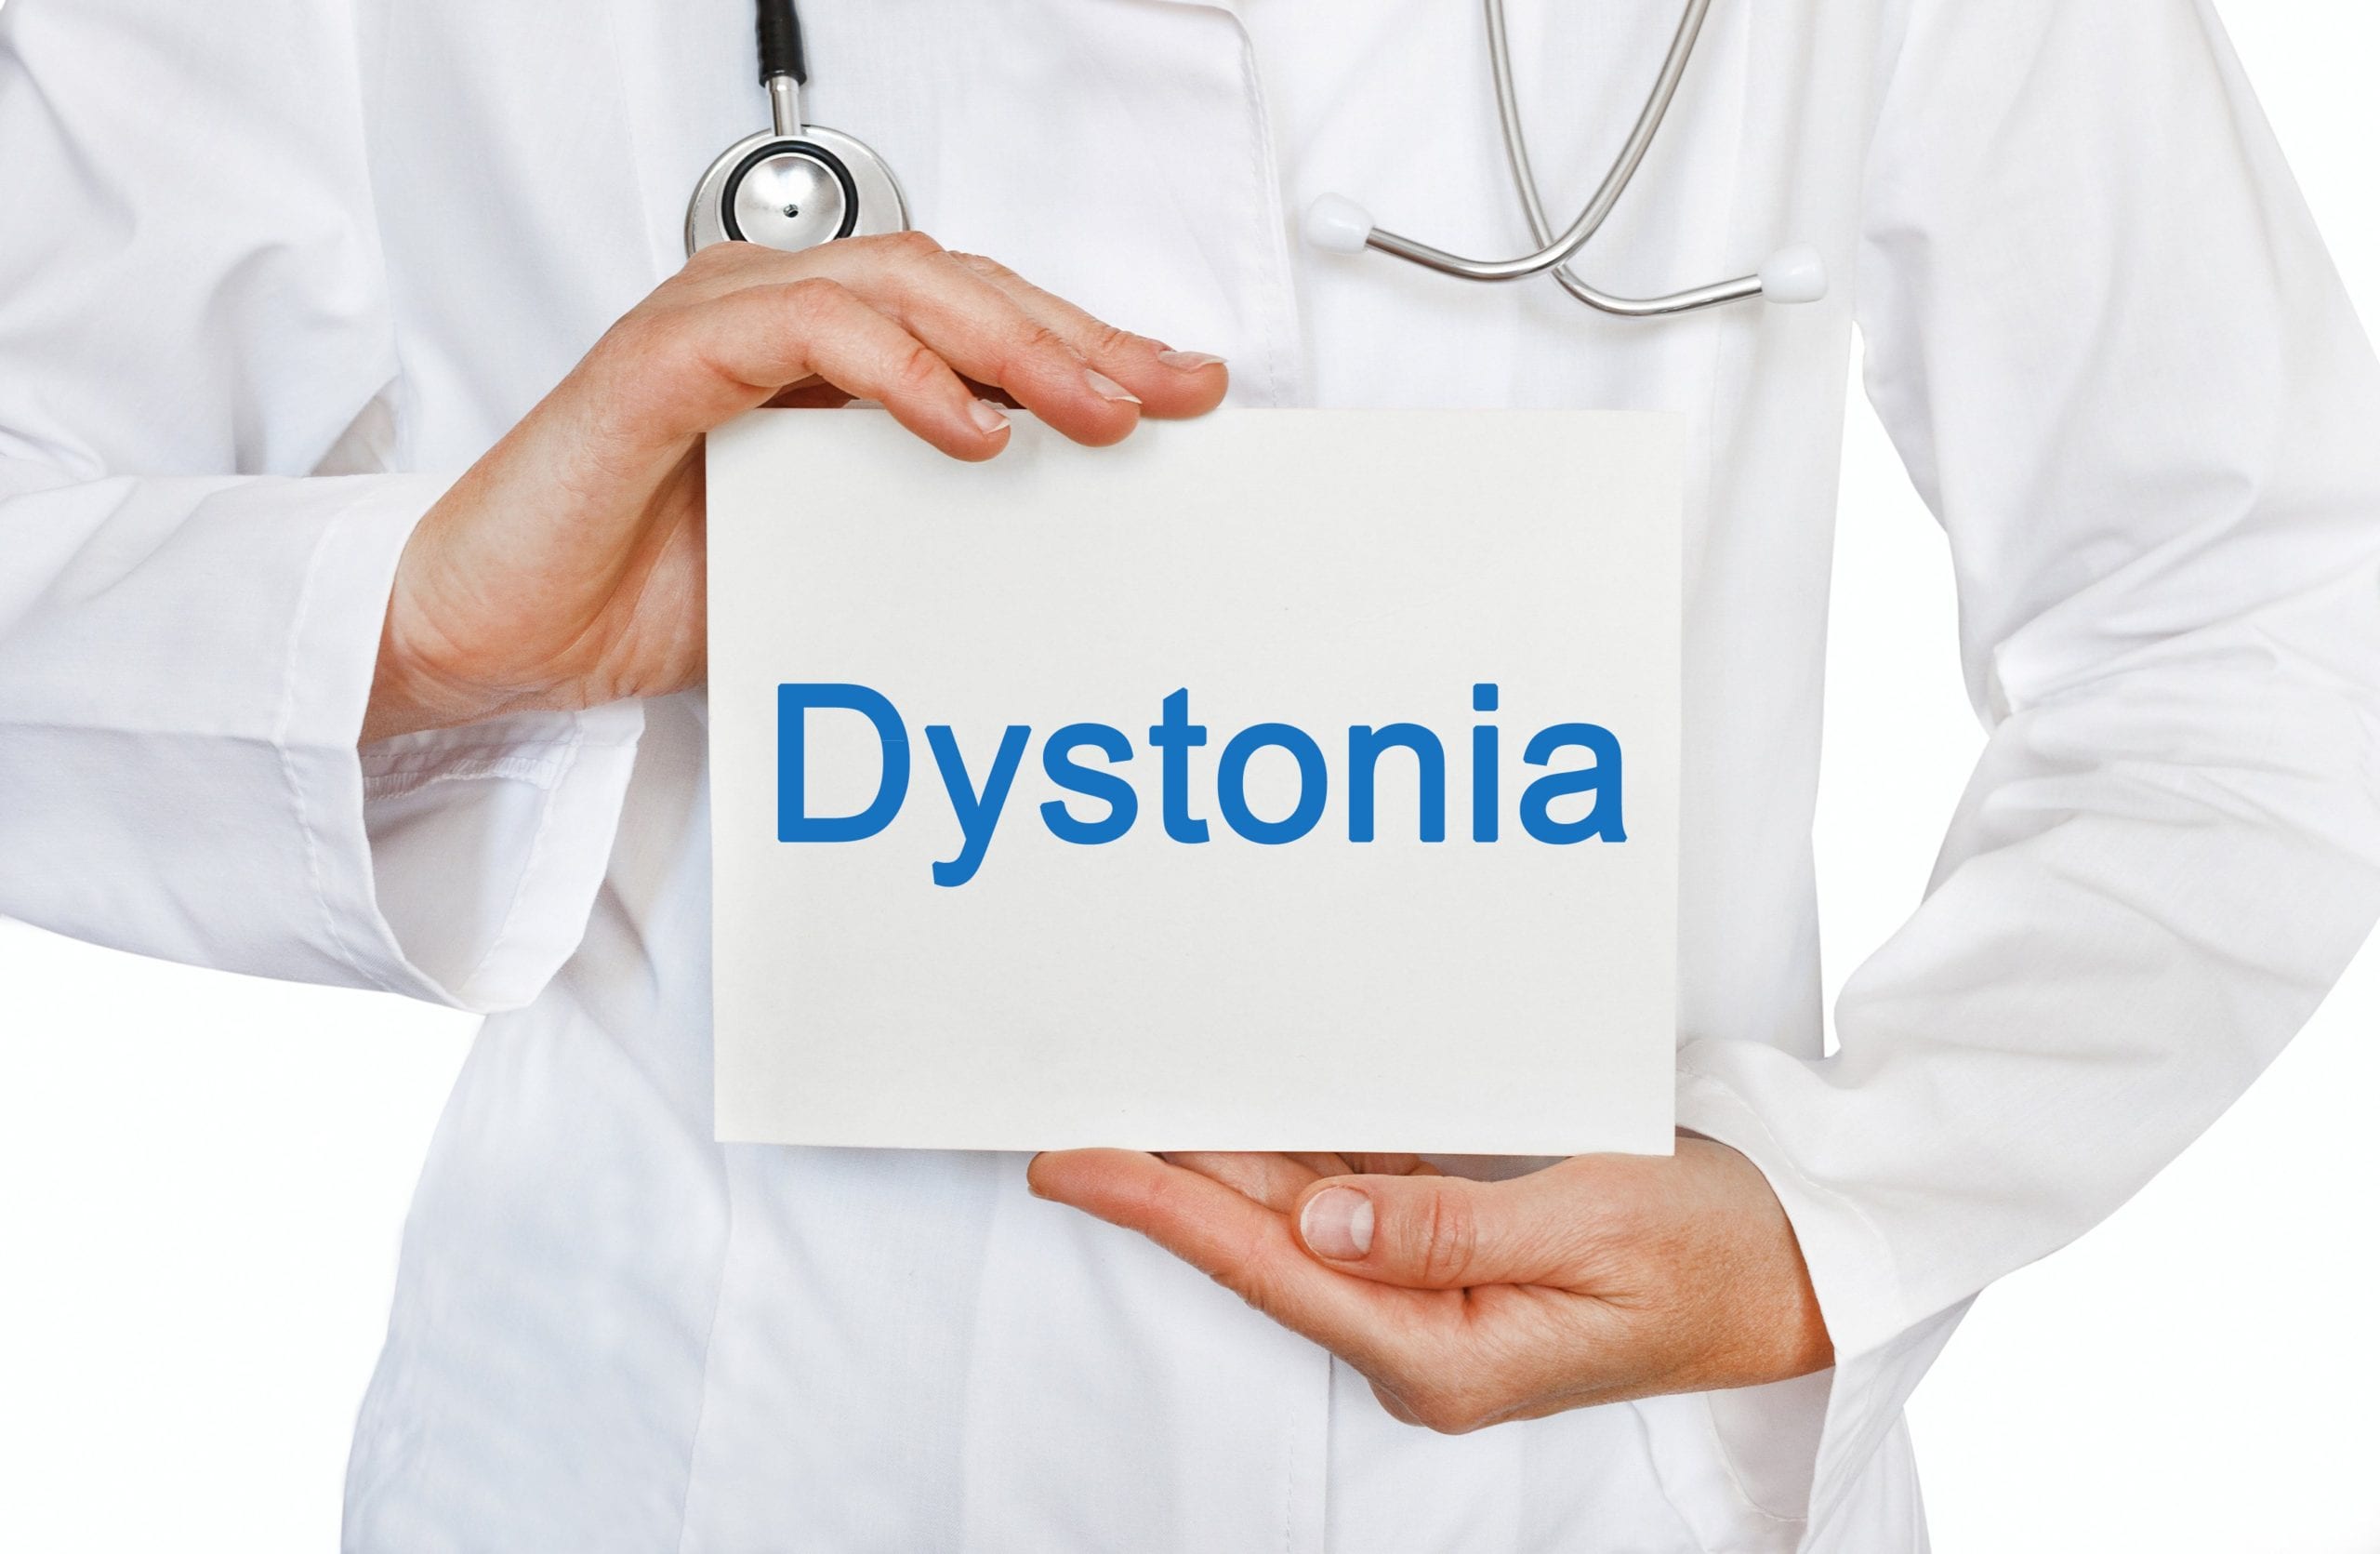 dystonia scaled